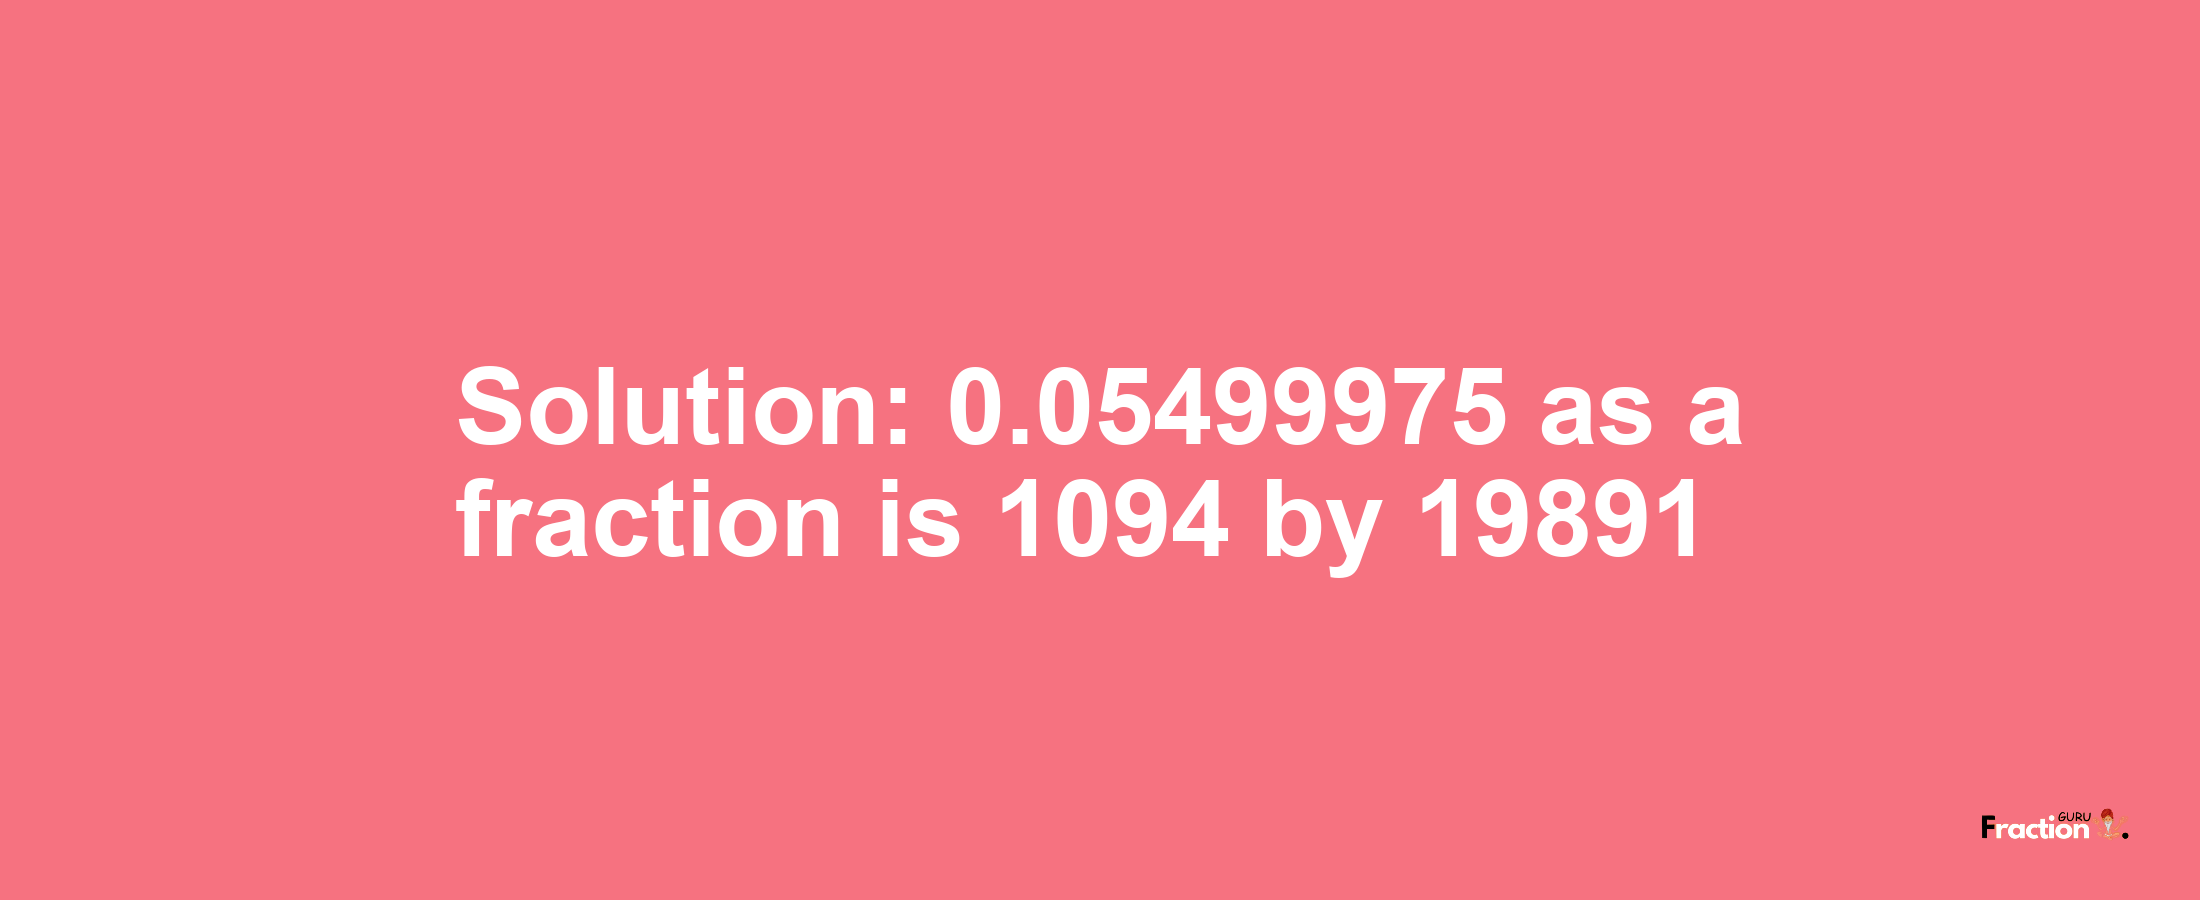 Solution:0.05499975 as a fraction is 1094/19891